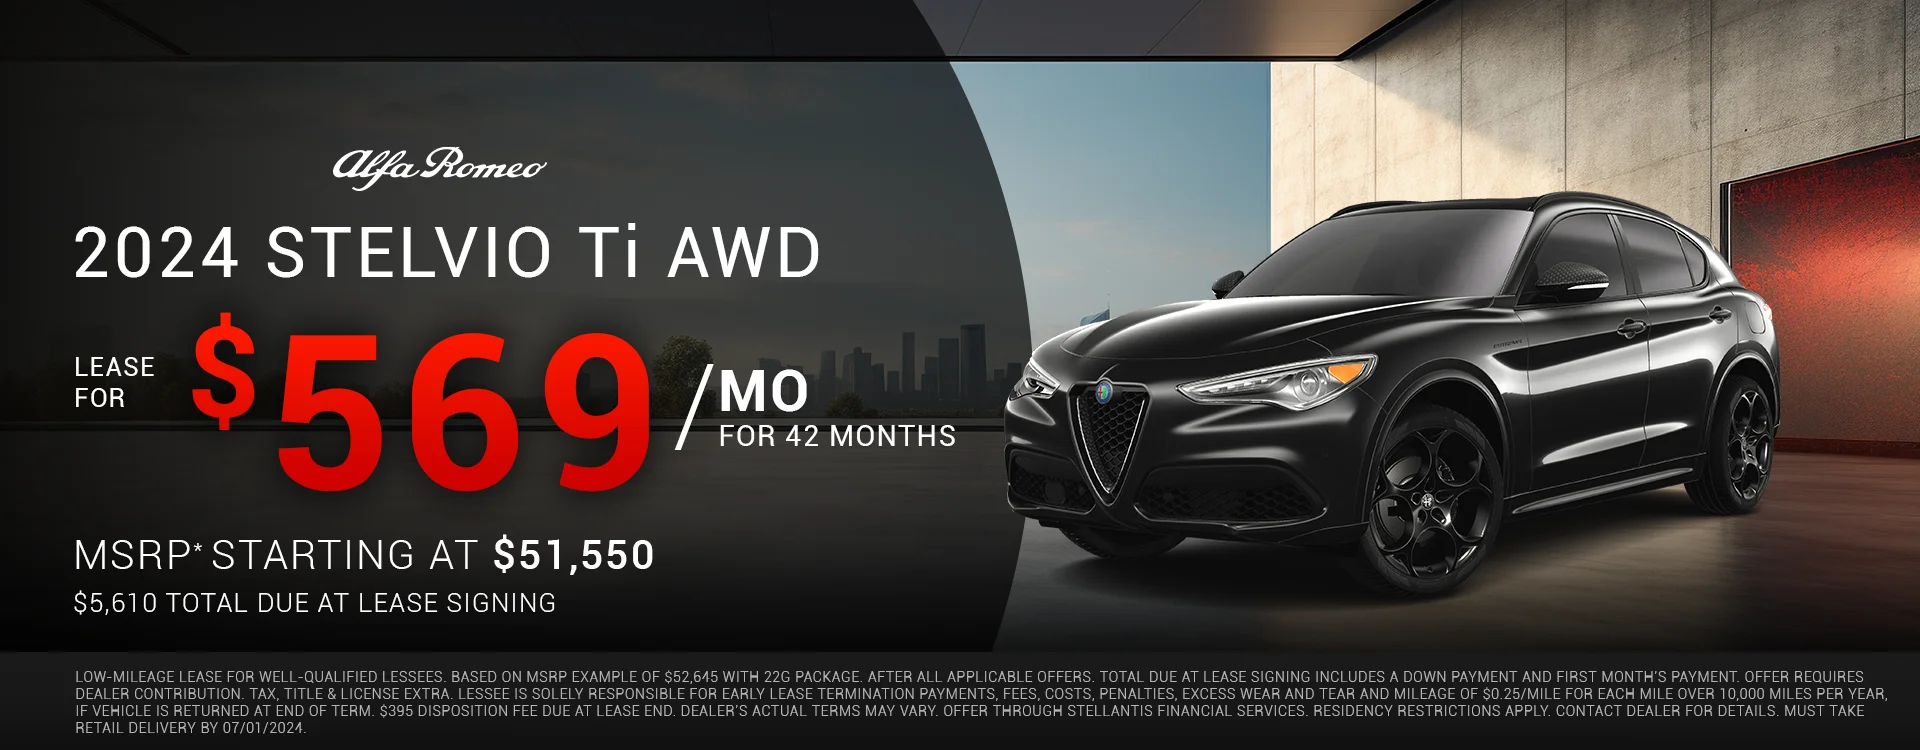 2024 Stelvio TI AWD Lease for $570 per month for 42 months